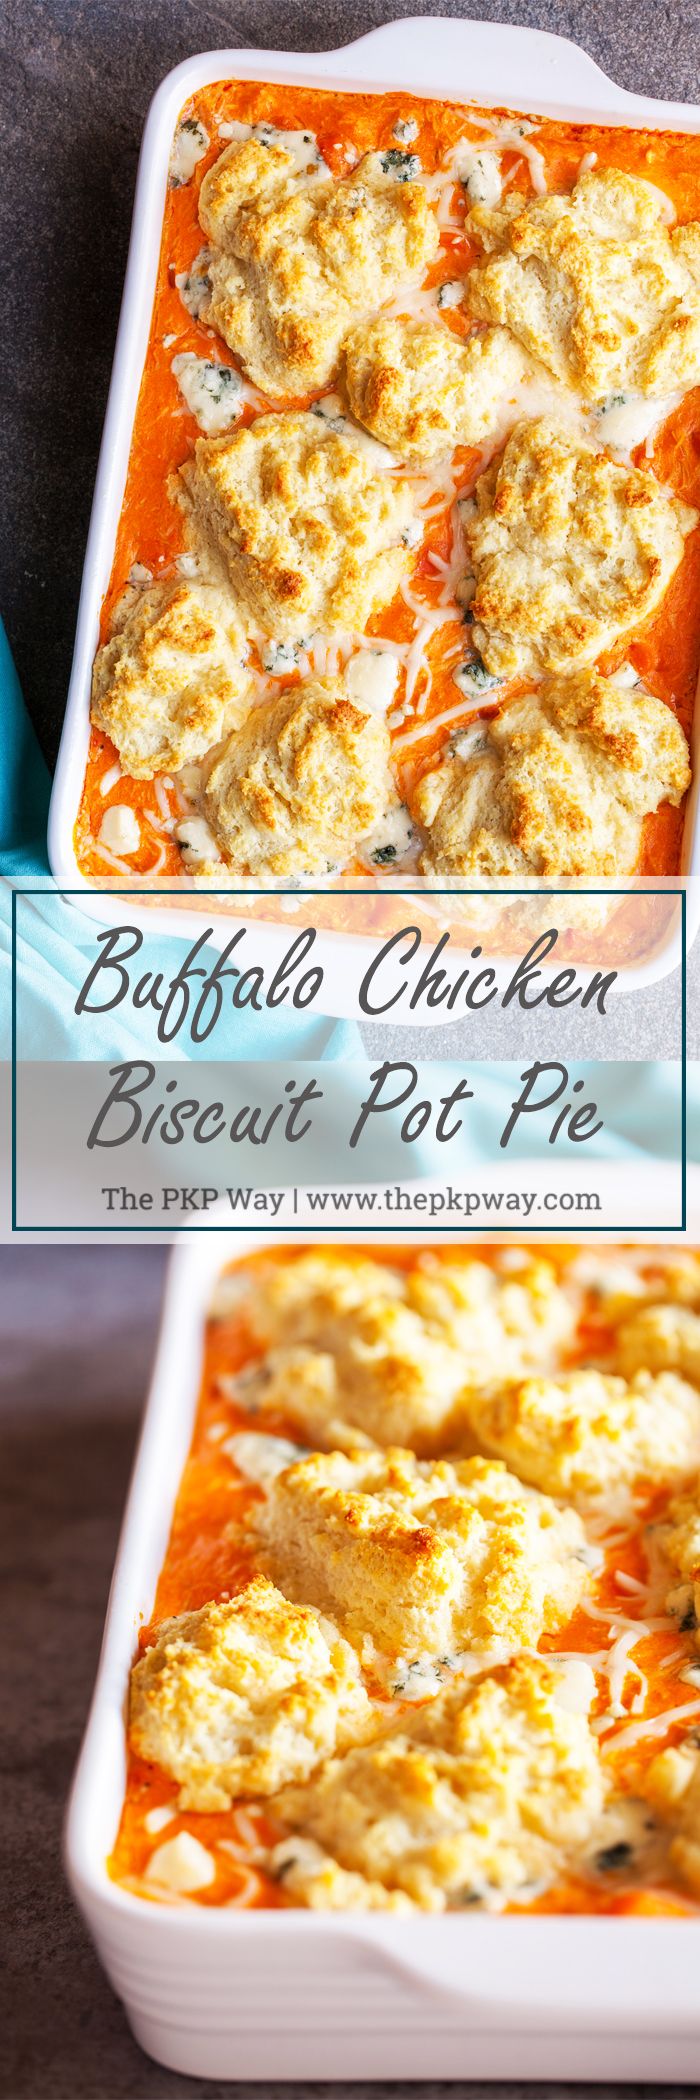 Buffalo Chicken Biscuit Pot Pie – All the deliciousness of chicken pot pie, buffalo wings, and a flaky crust, but with the ease of a casserole.